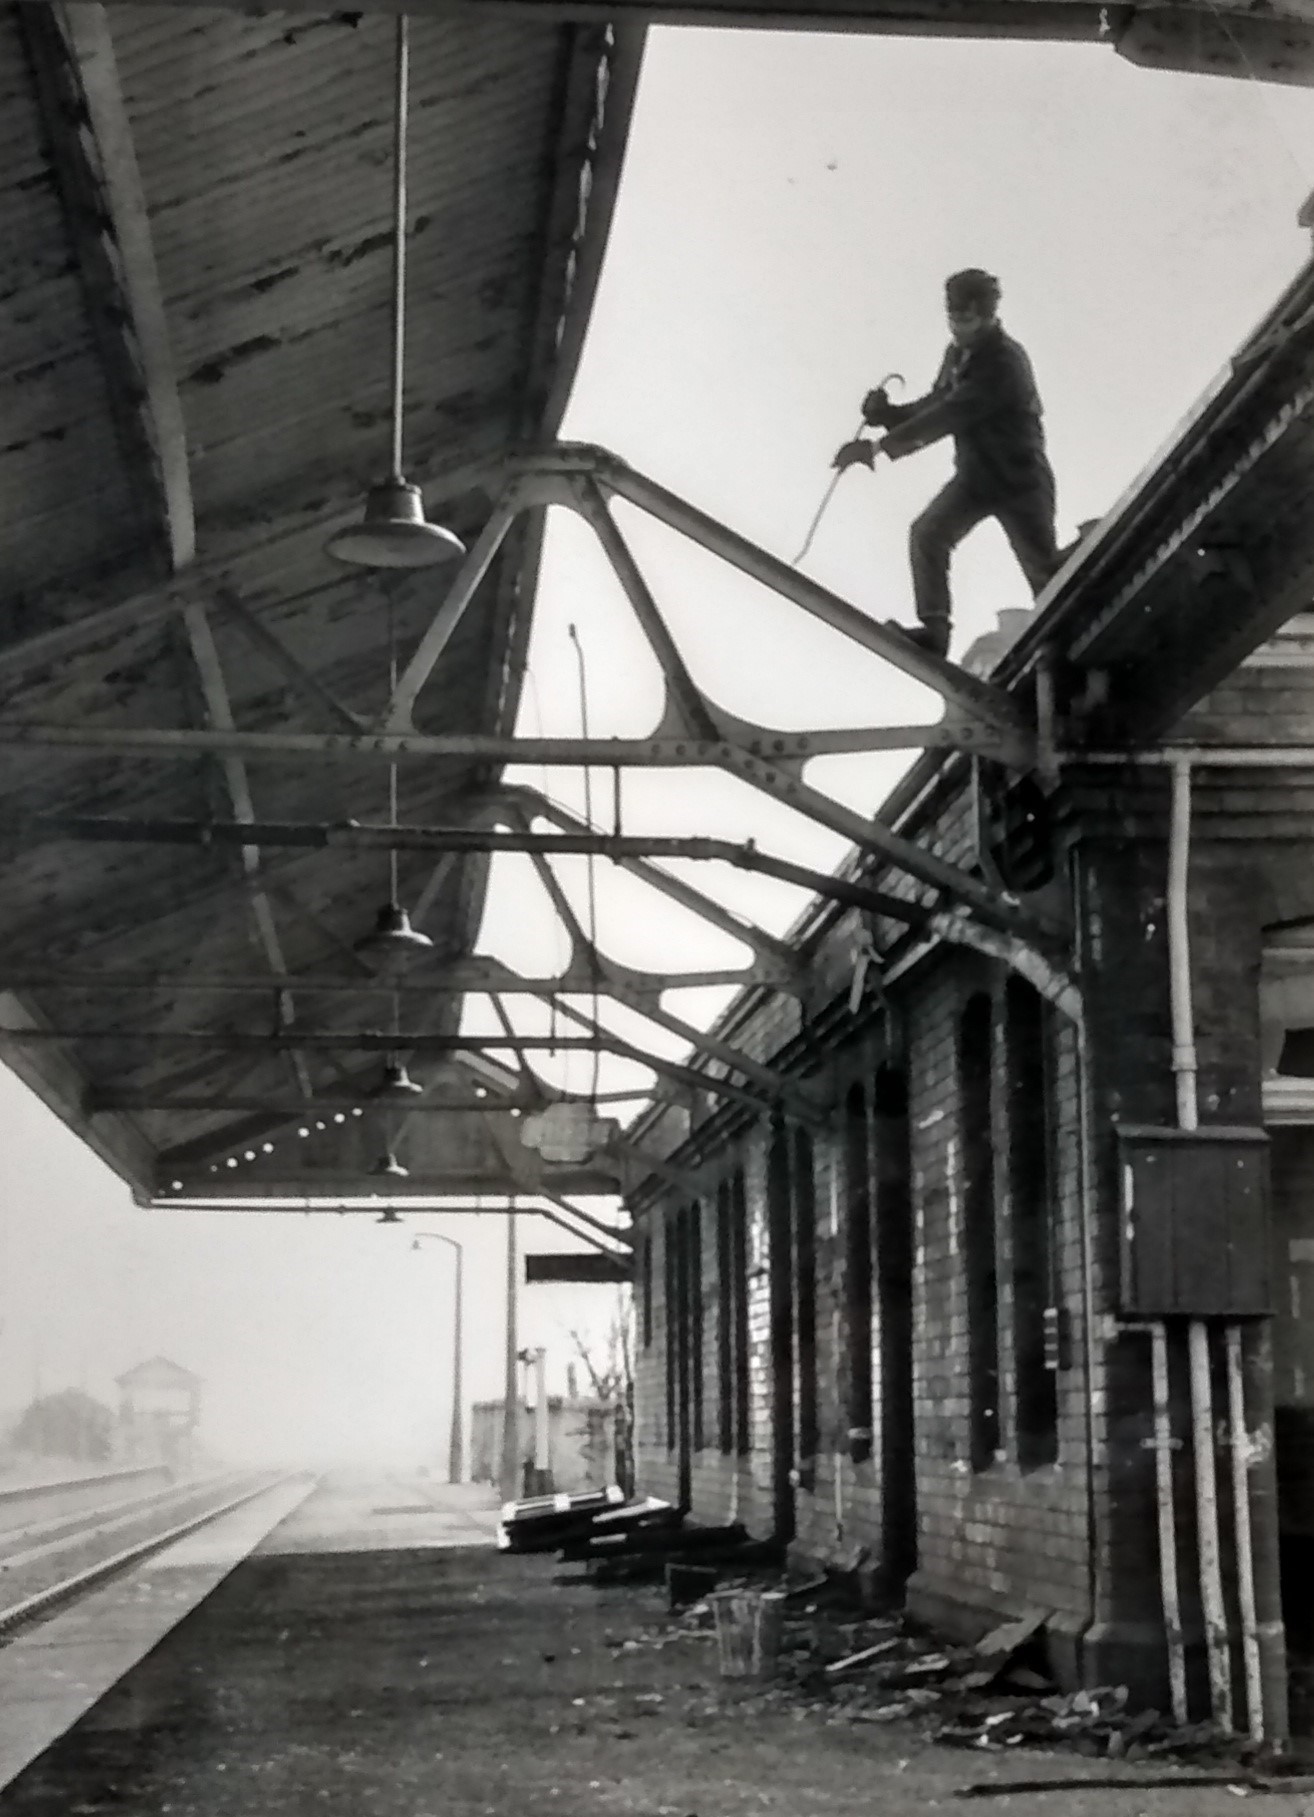 Demolition work goes on at Pershore railway station in March 1970